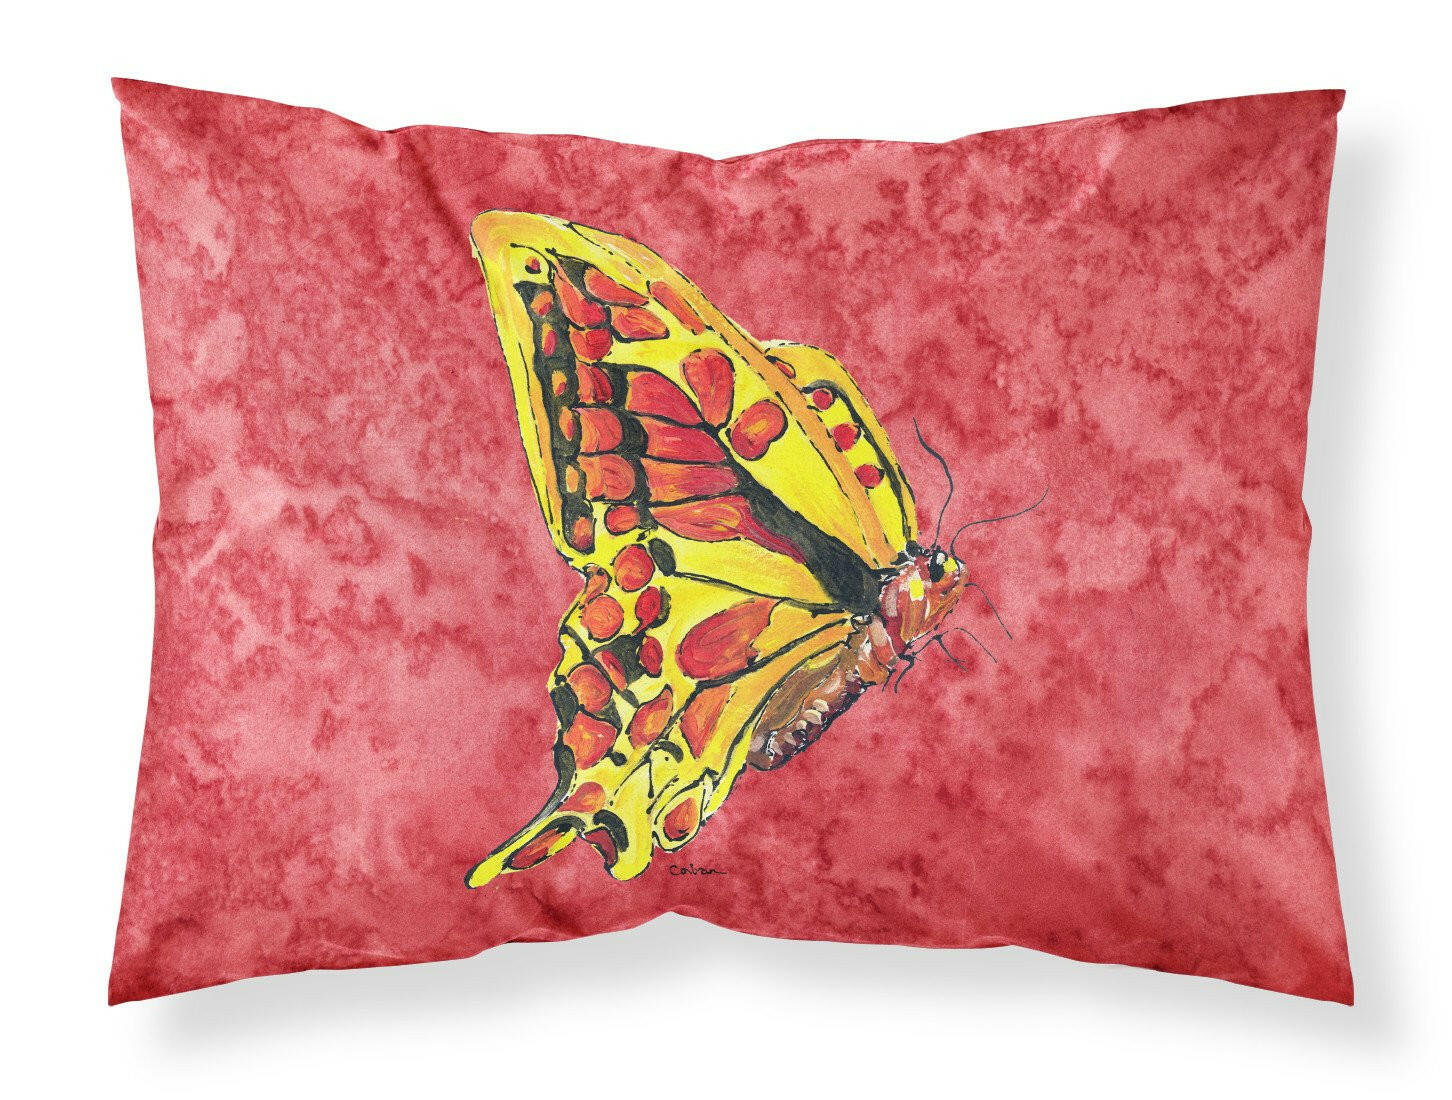 Butterfly on Red Moisture wicking Fabric standard pillowcase by Caroline's Treasures